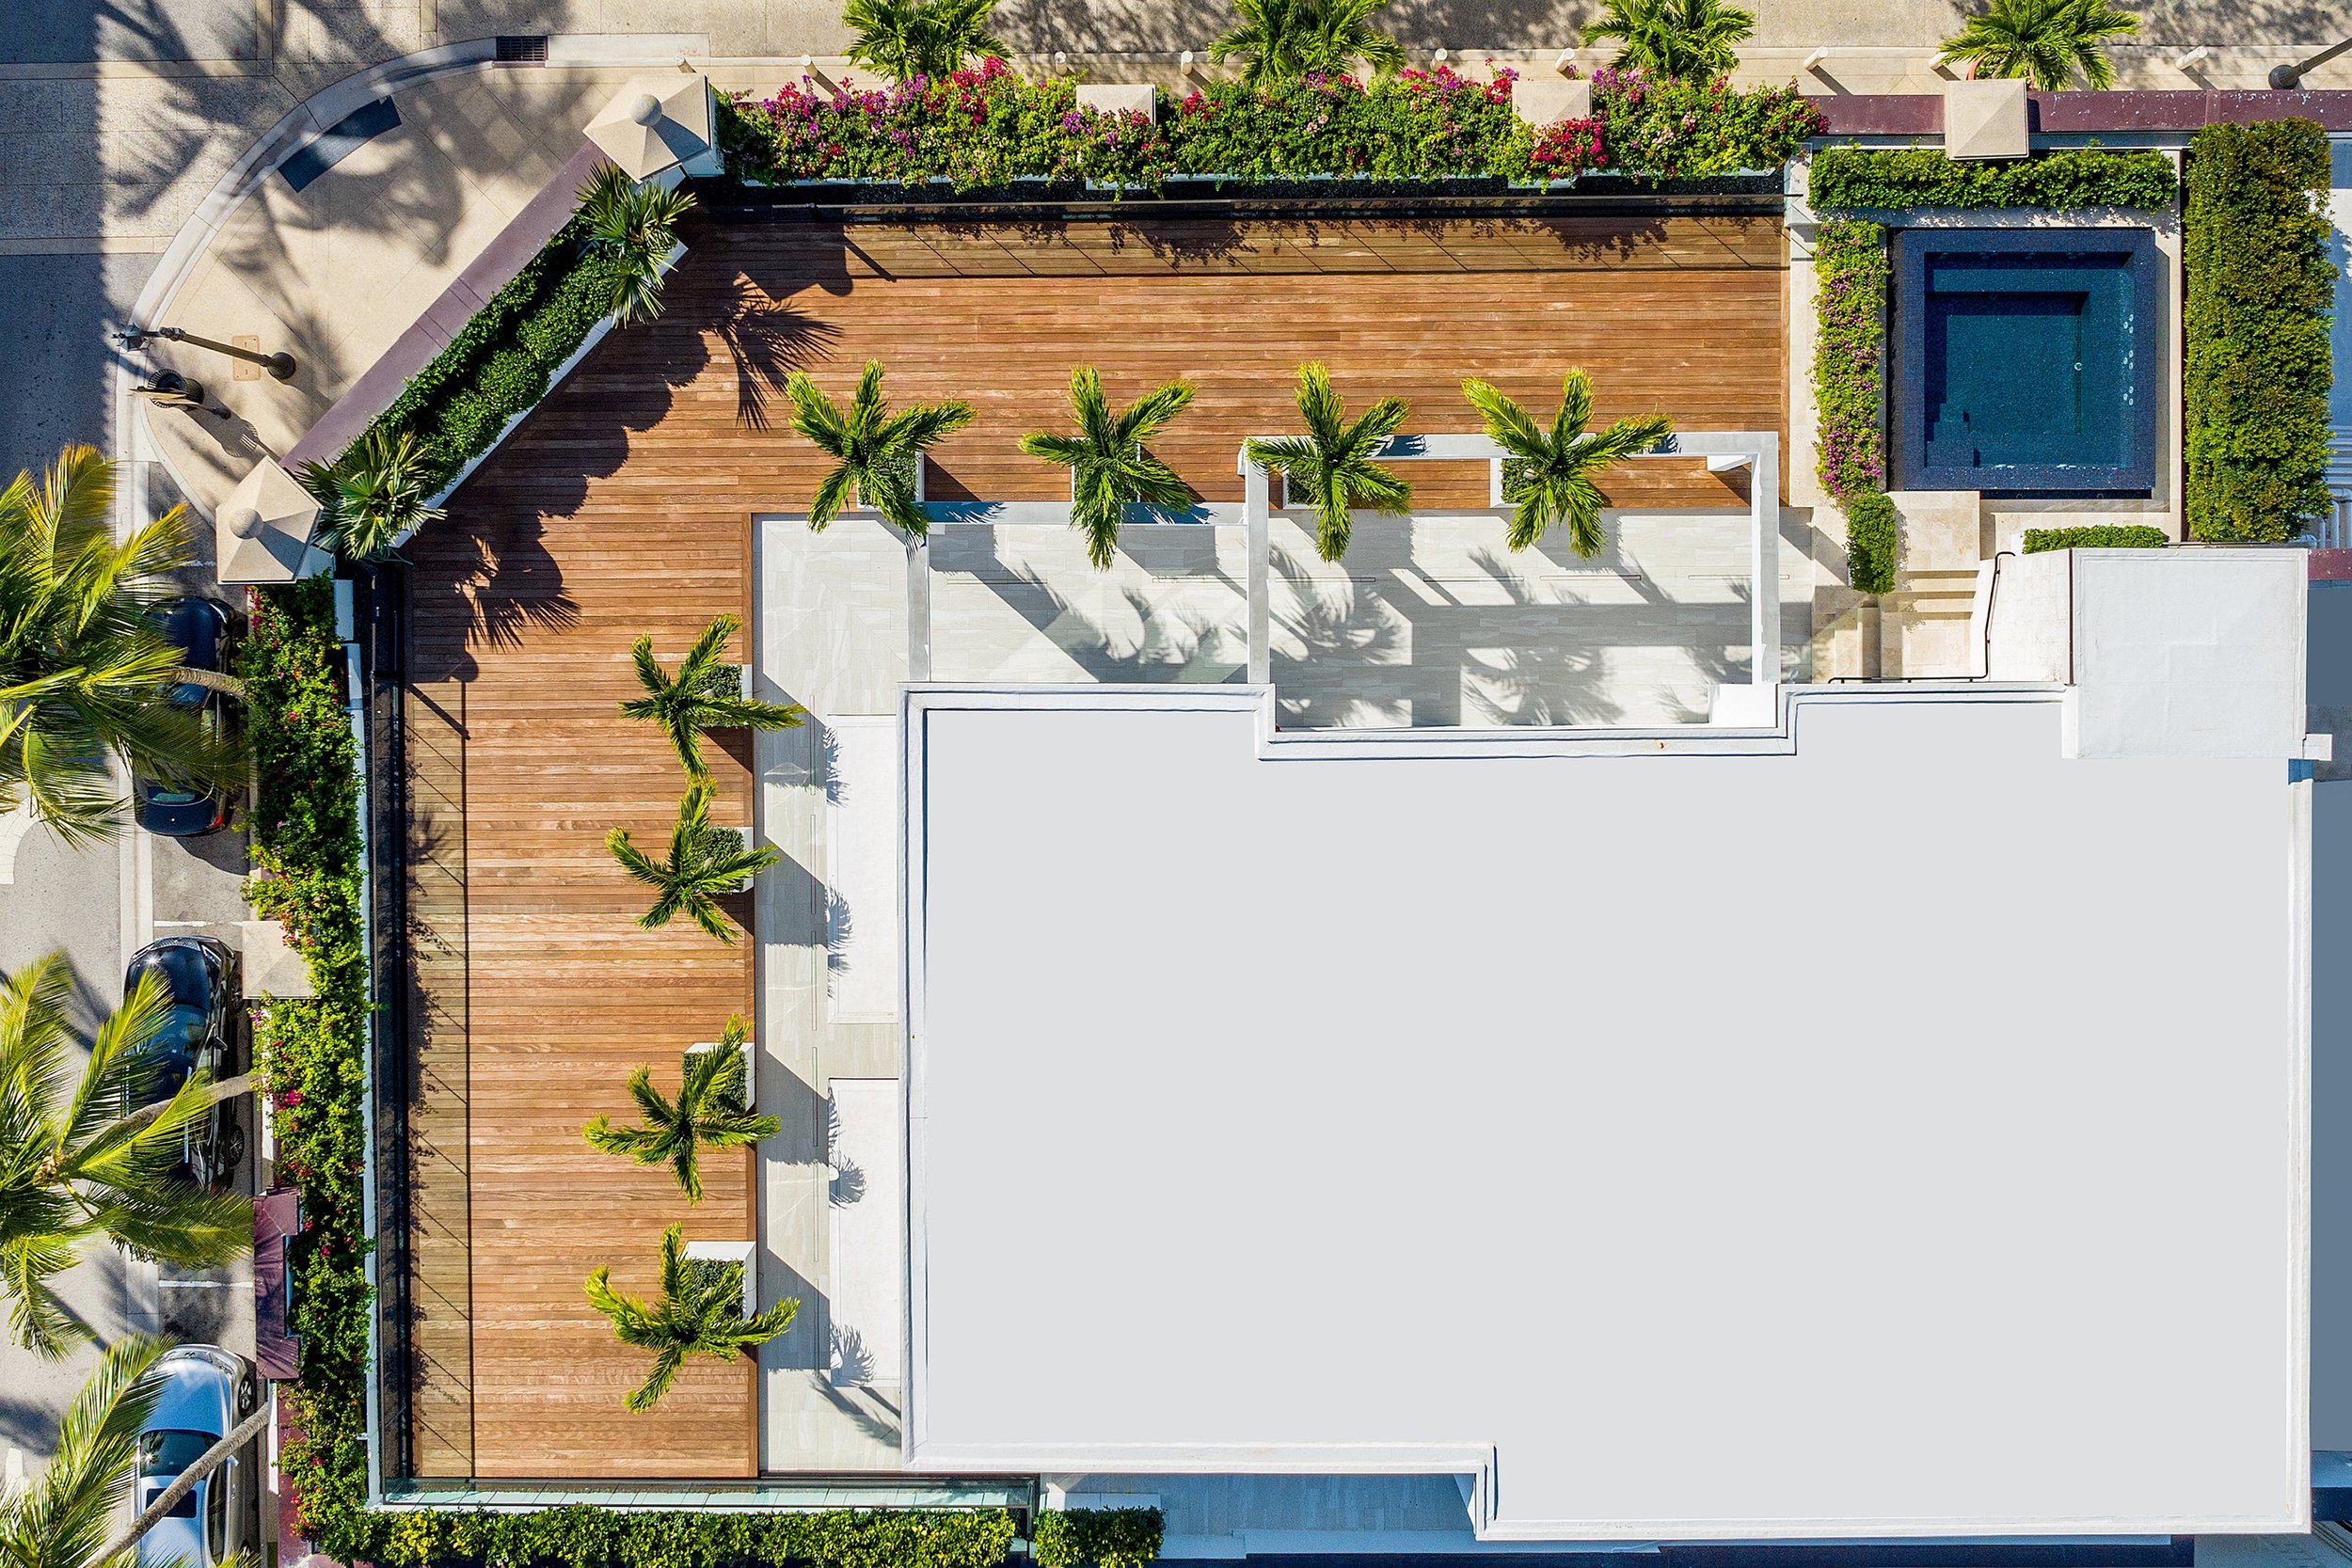 415 Hibiscus Avenue Todd Michael Glaser Sells One-Of-A-Kind Worth Avenue Penthouse Atop Tiffany & Co. Building In Palm Beach For $18 Million 7.jpg